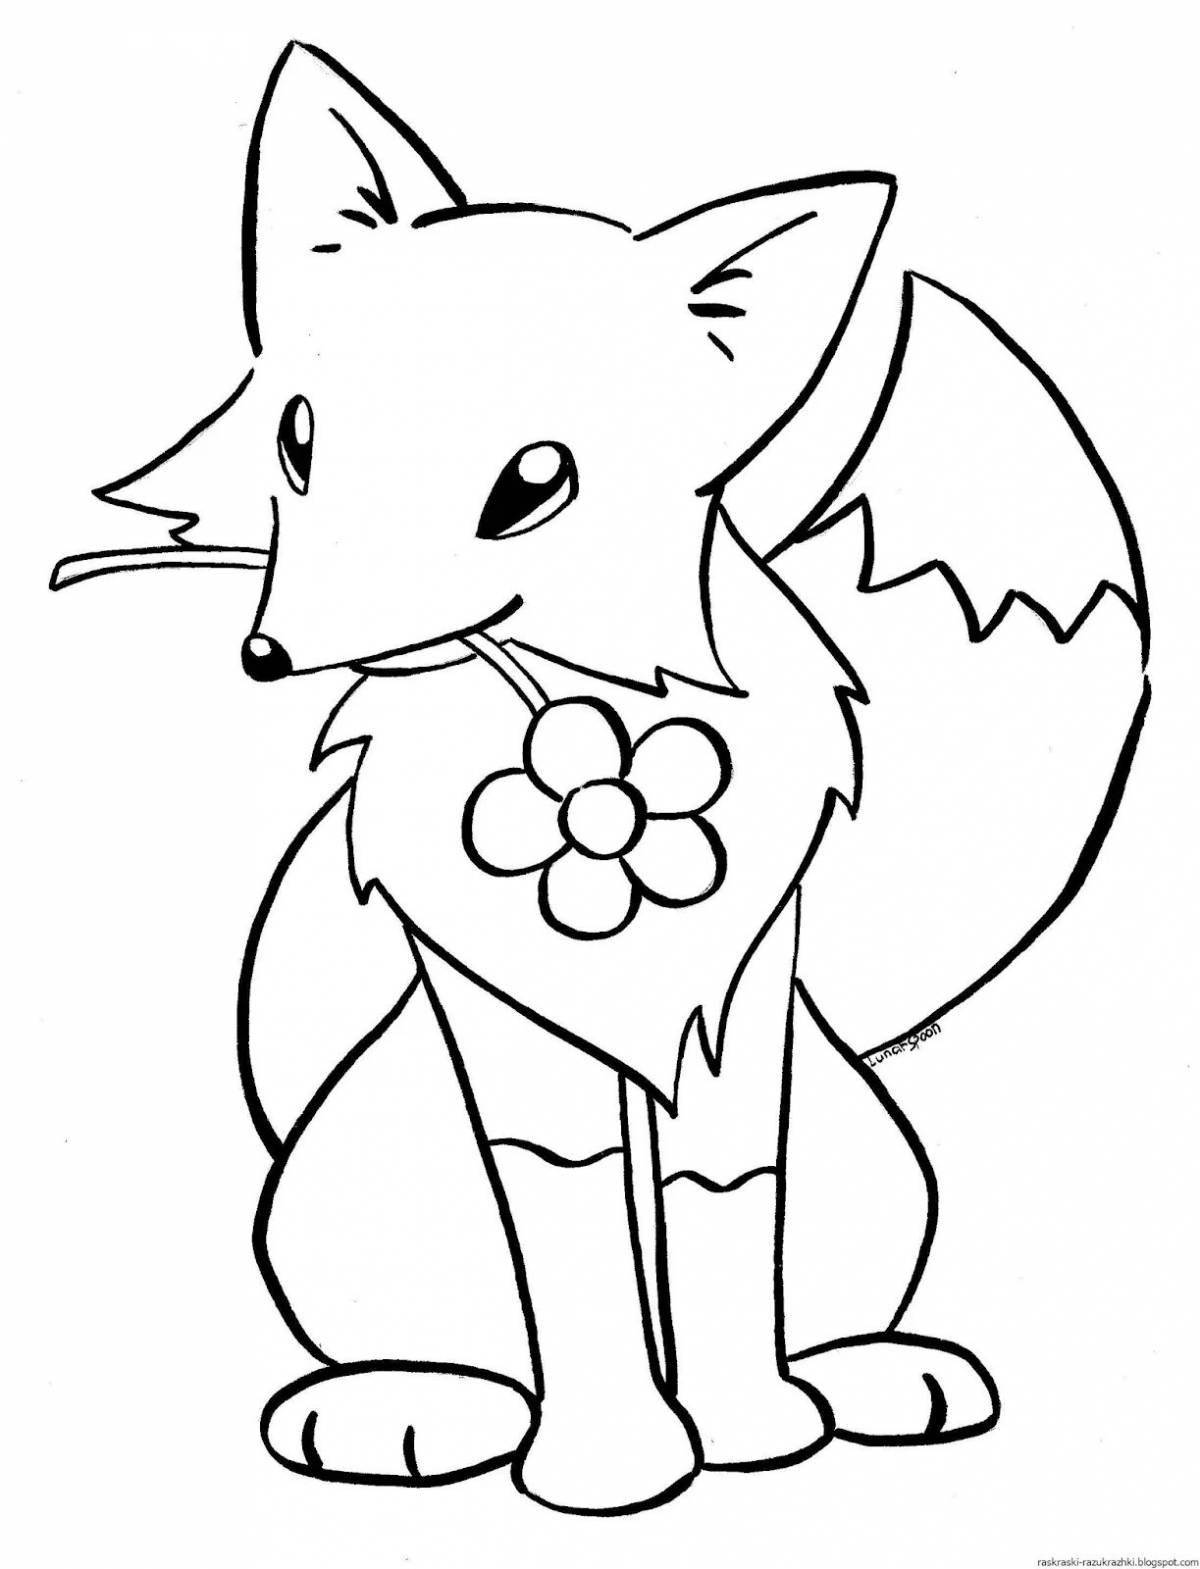 Coloring book cheerful fox for children 3-4 years old